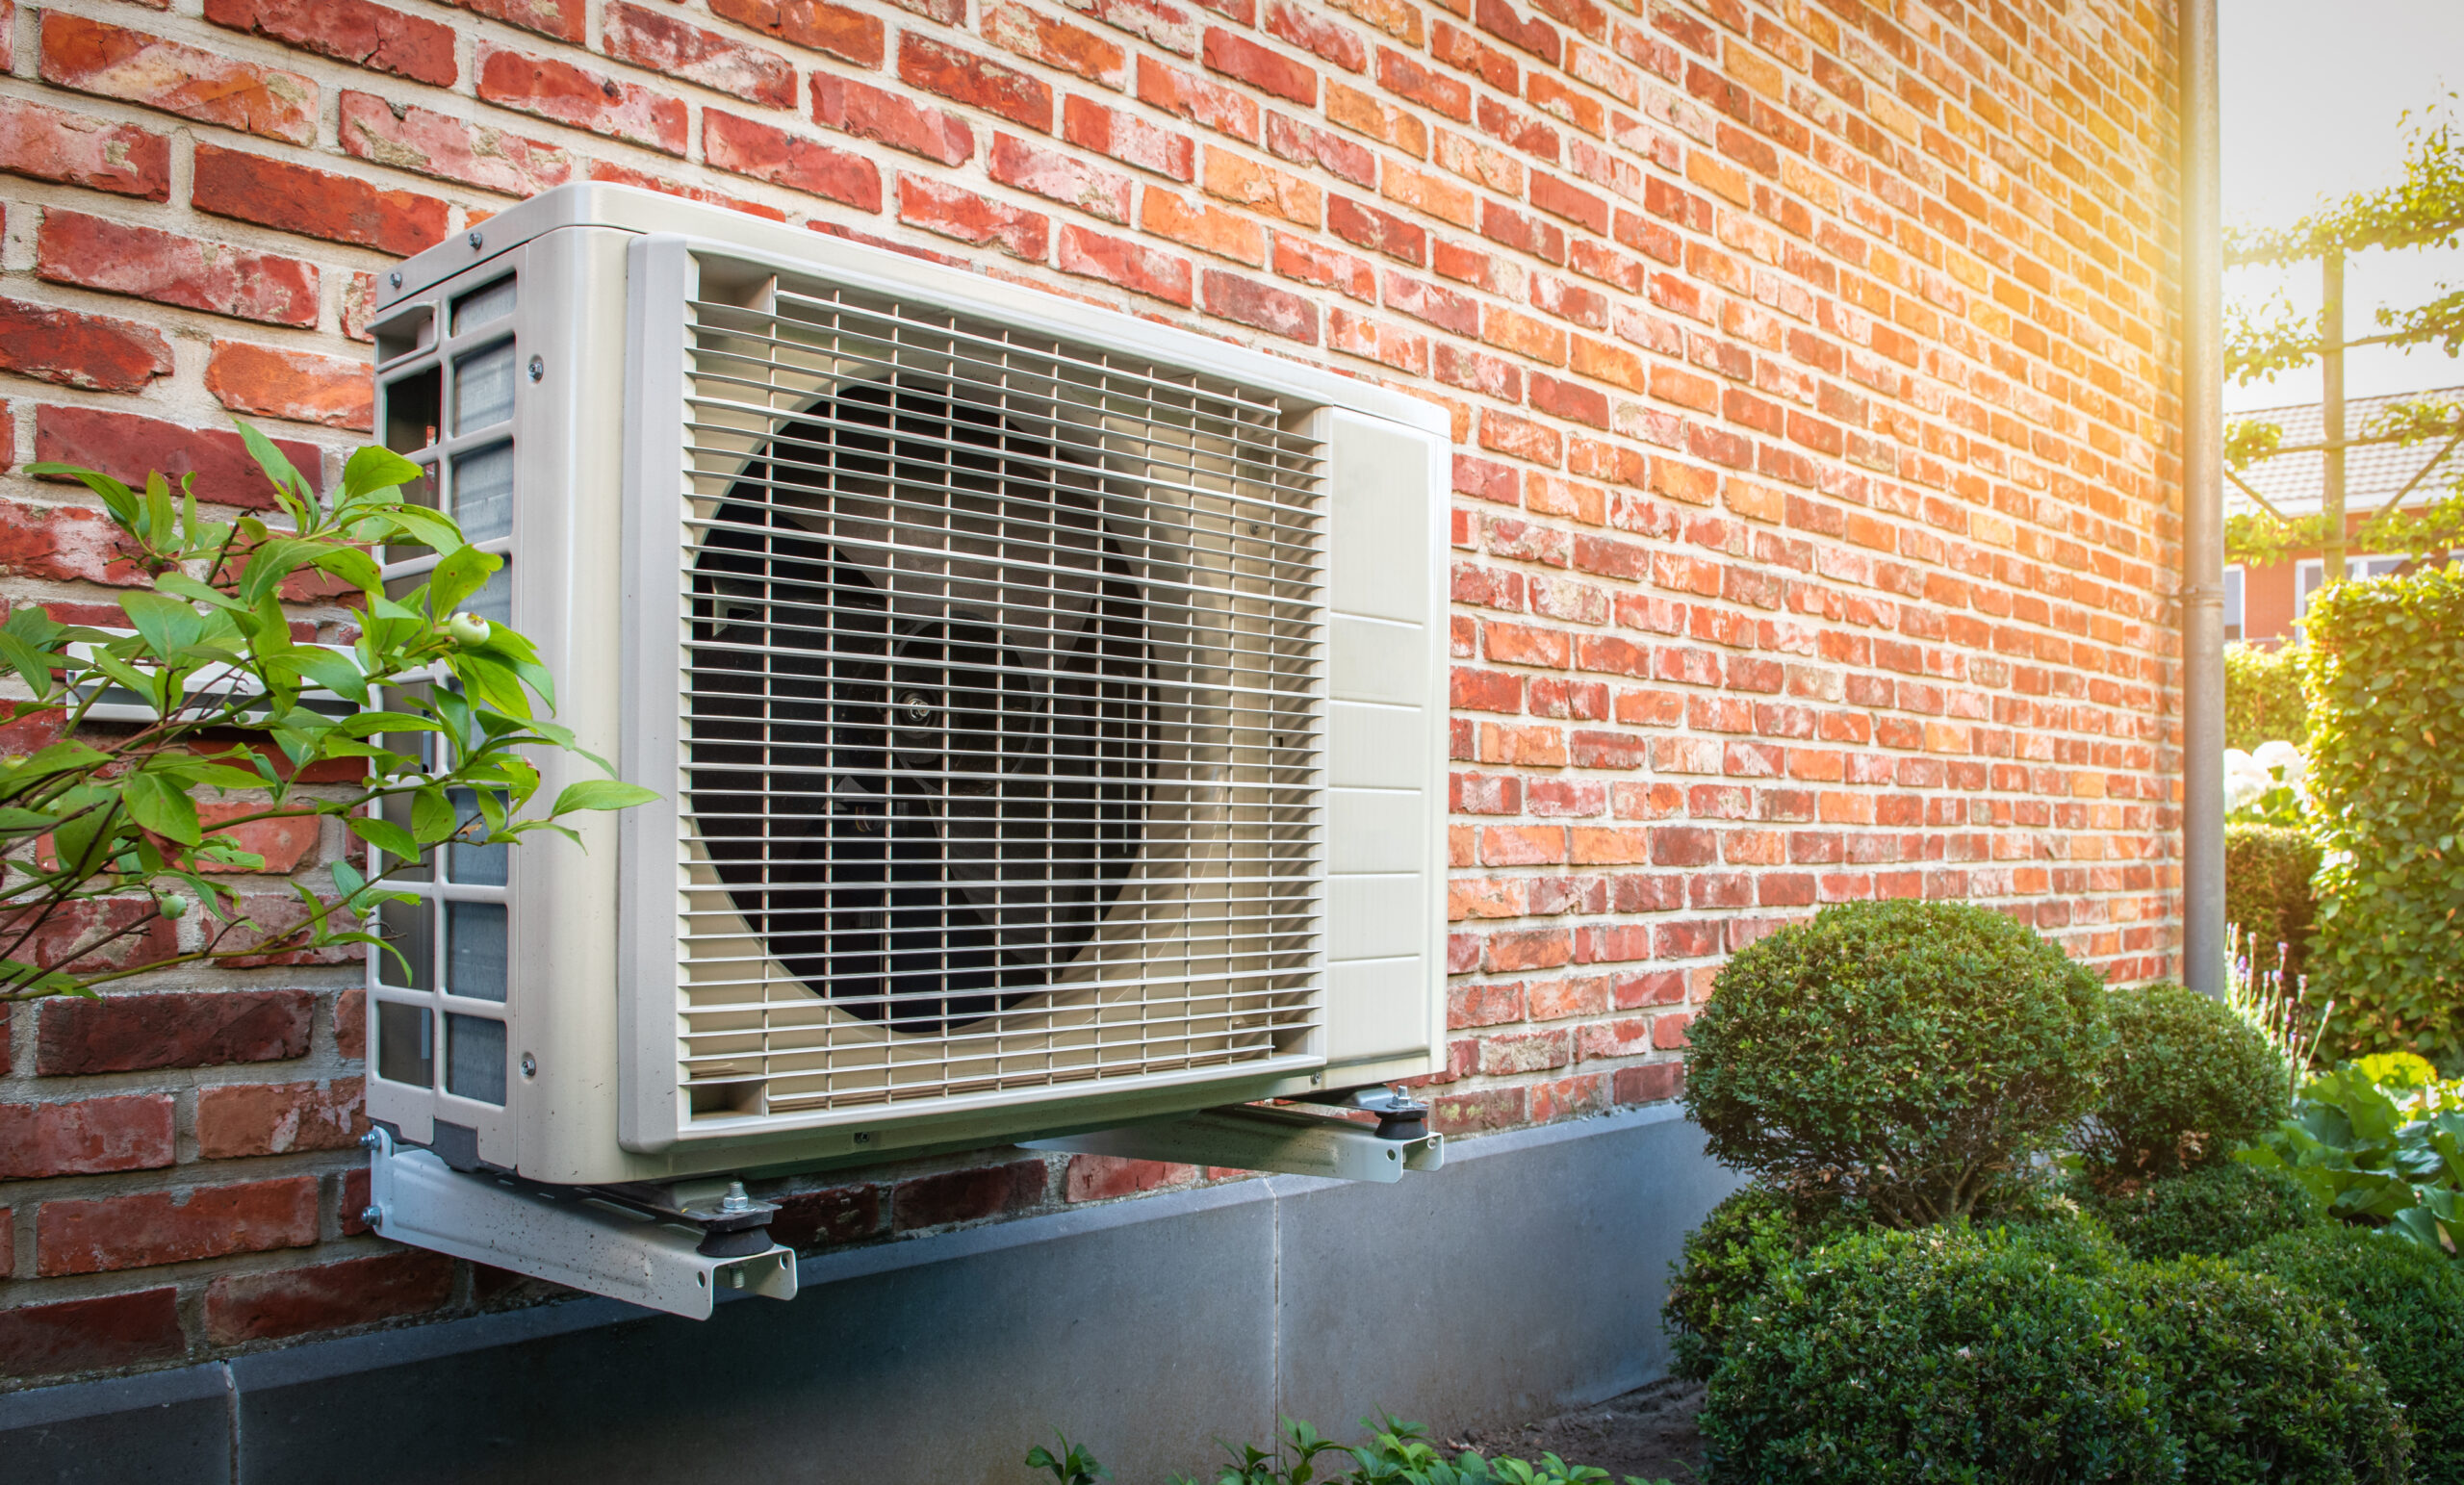 Heat pump mounted on the brick wall of an Ohio residence